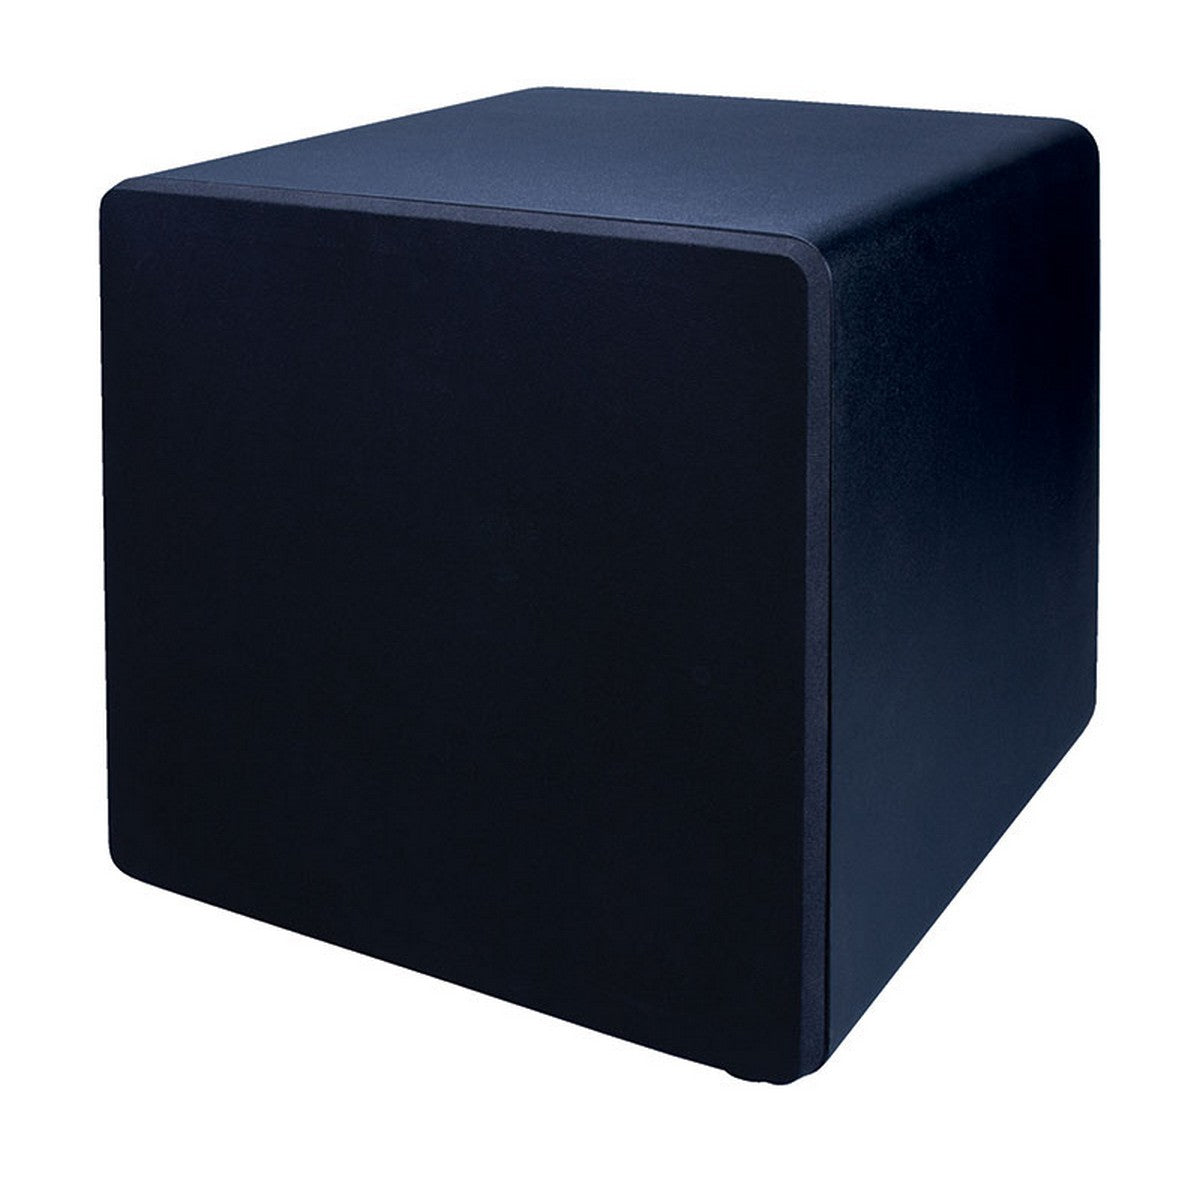 Beale Street Audio BPS-80 8-Inch In-Room Subwoofer with 200W Built-In Amplifier, Black